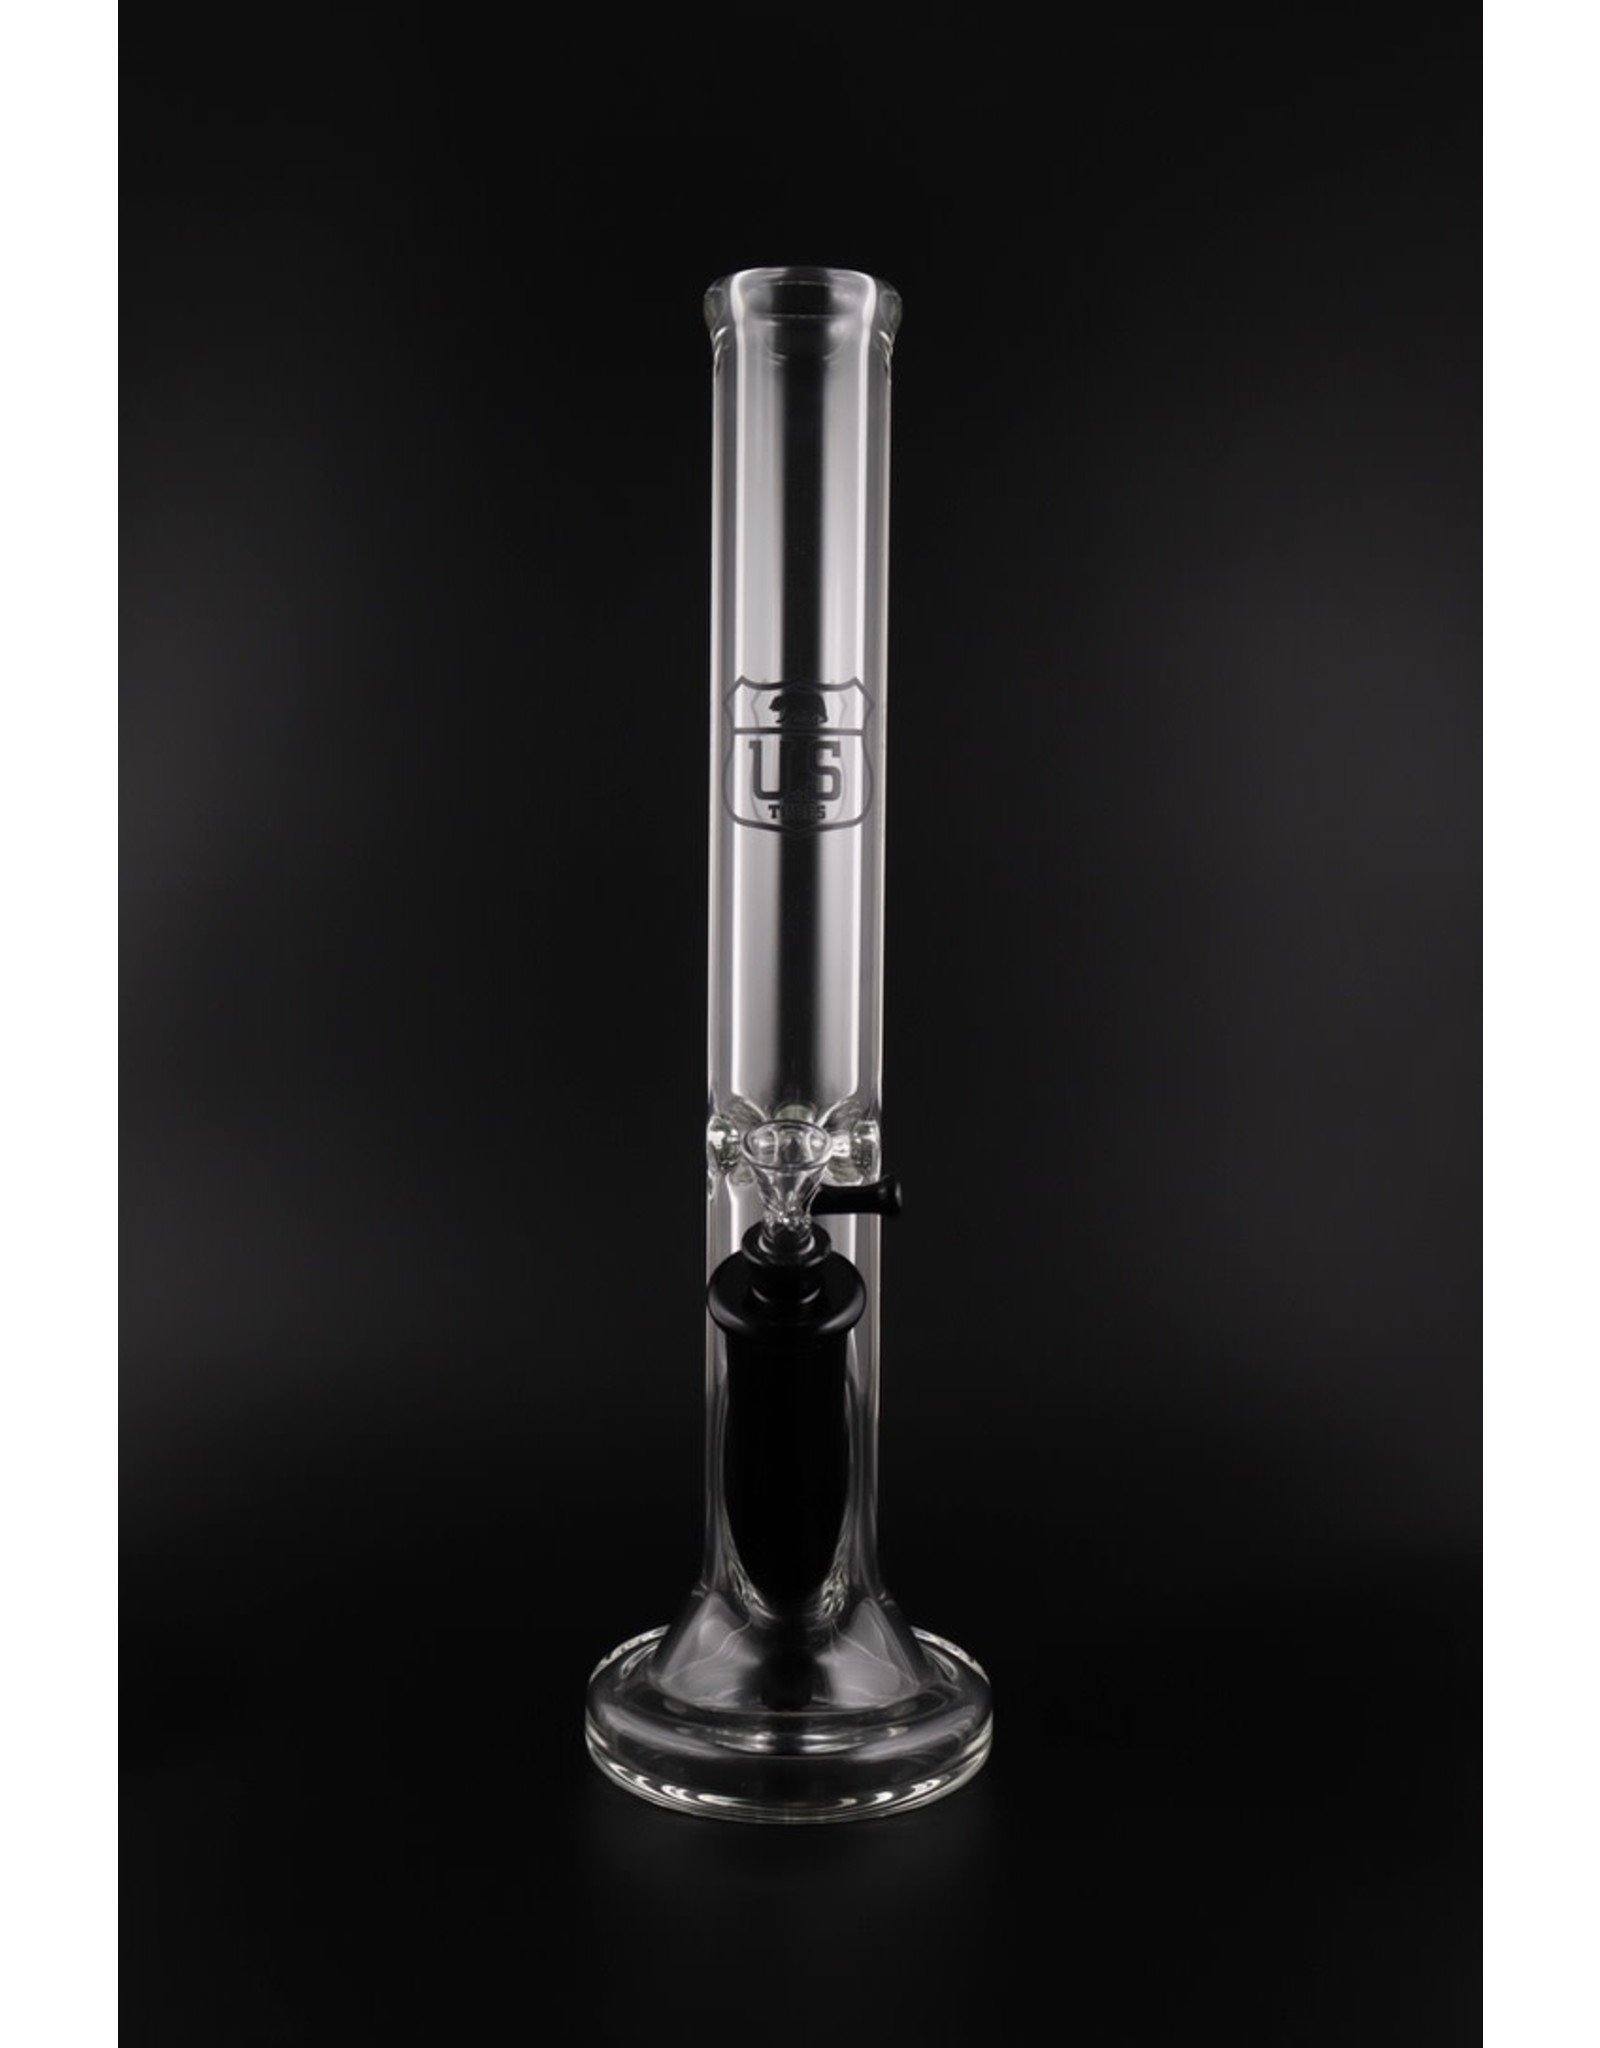 US Tubes Hybrid 50mm x 9mm Water Pipe